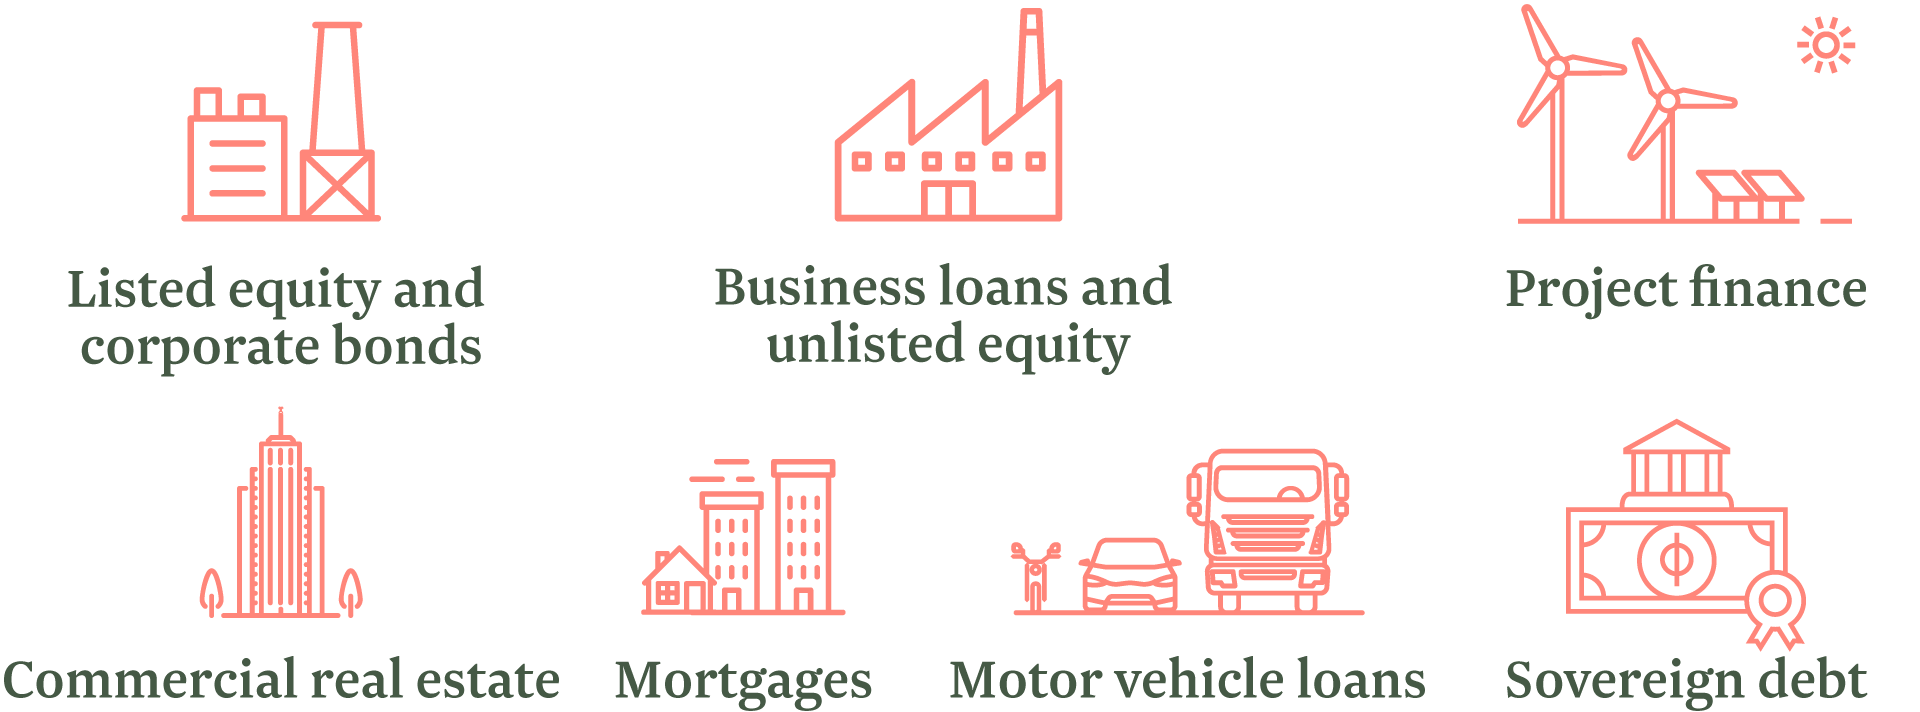 Listed equity and corporate bonds Business loans and unlisted equity Project finance Commercial real estate Mortgages Motor vehicle loans